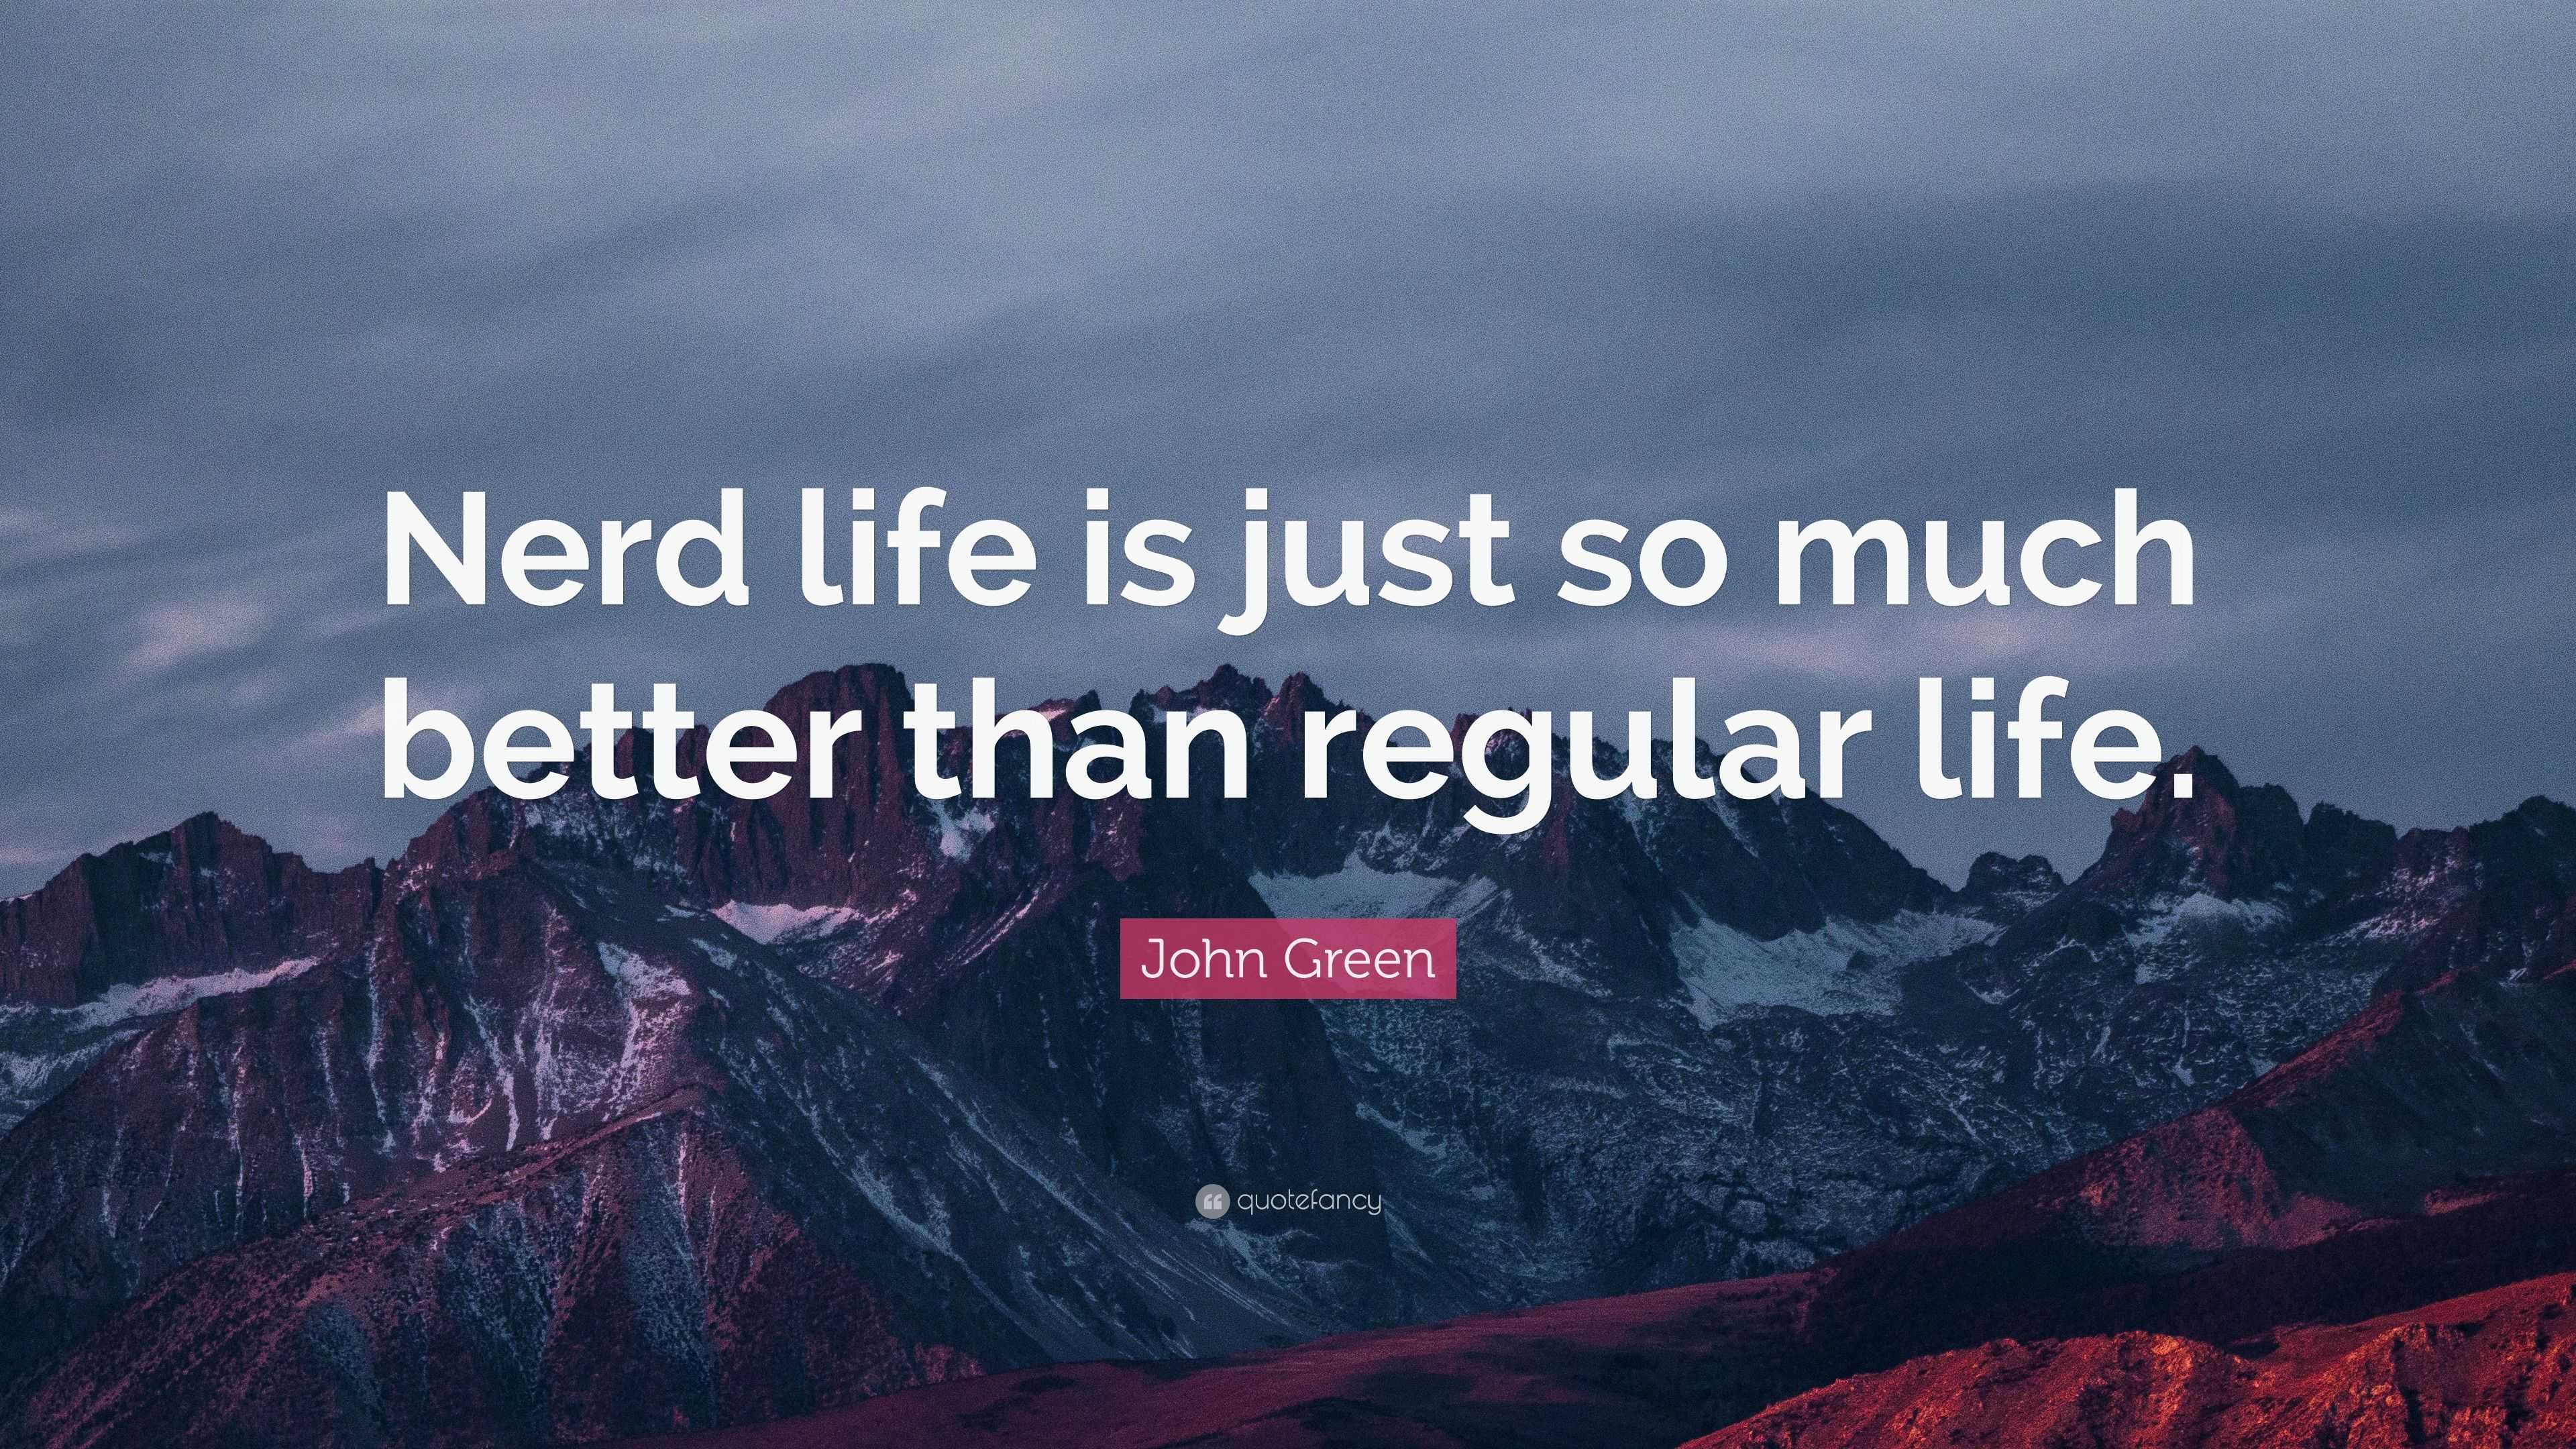 John Green Quote “nerd Life Is Just So Much Better Than Regular Life”